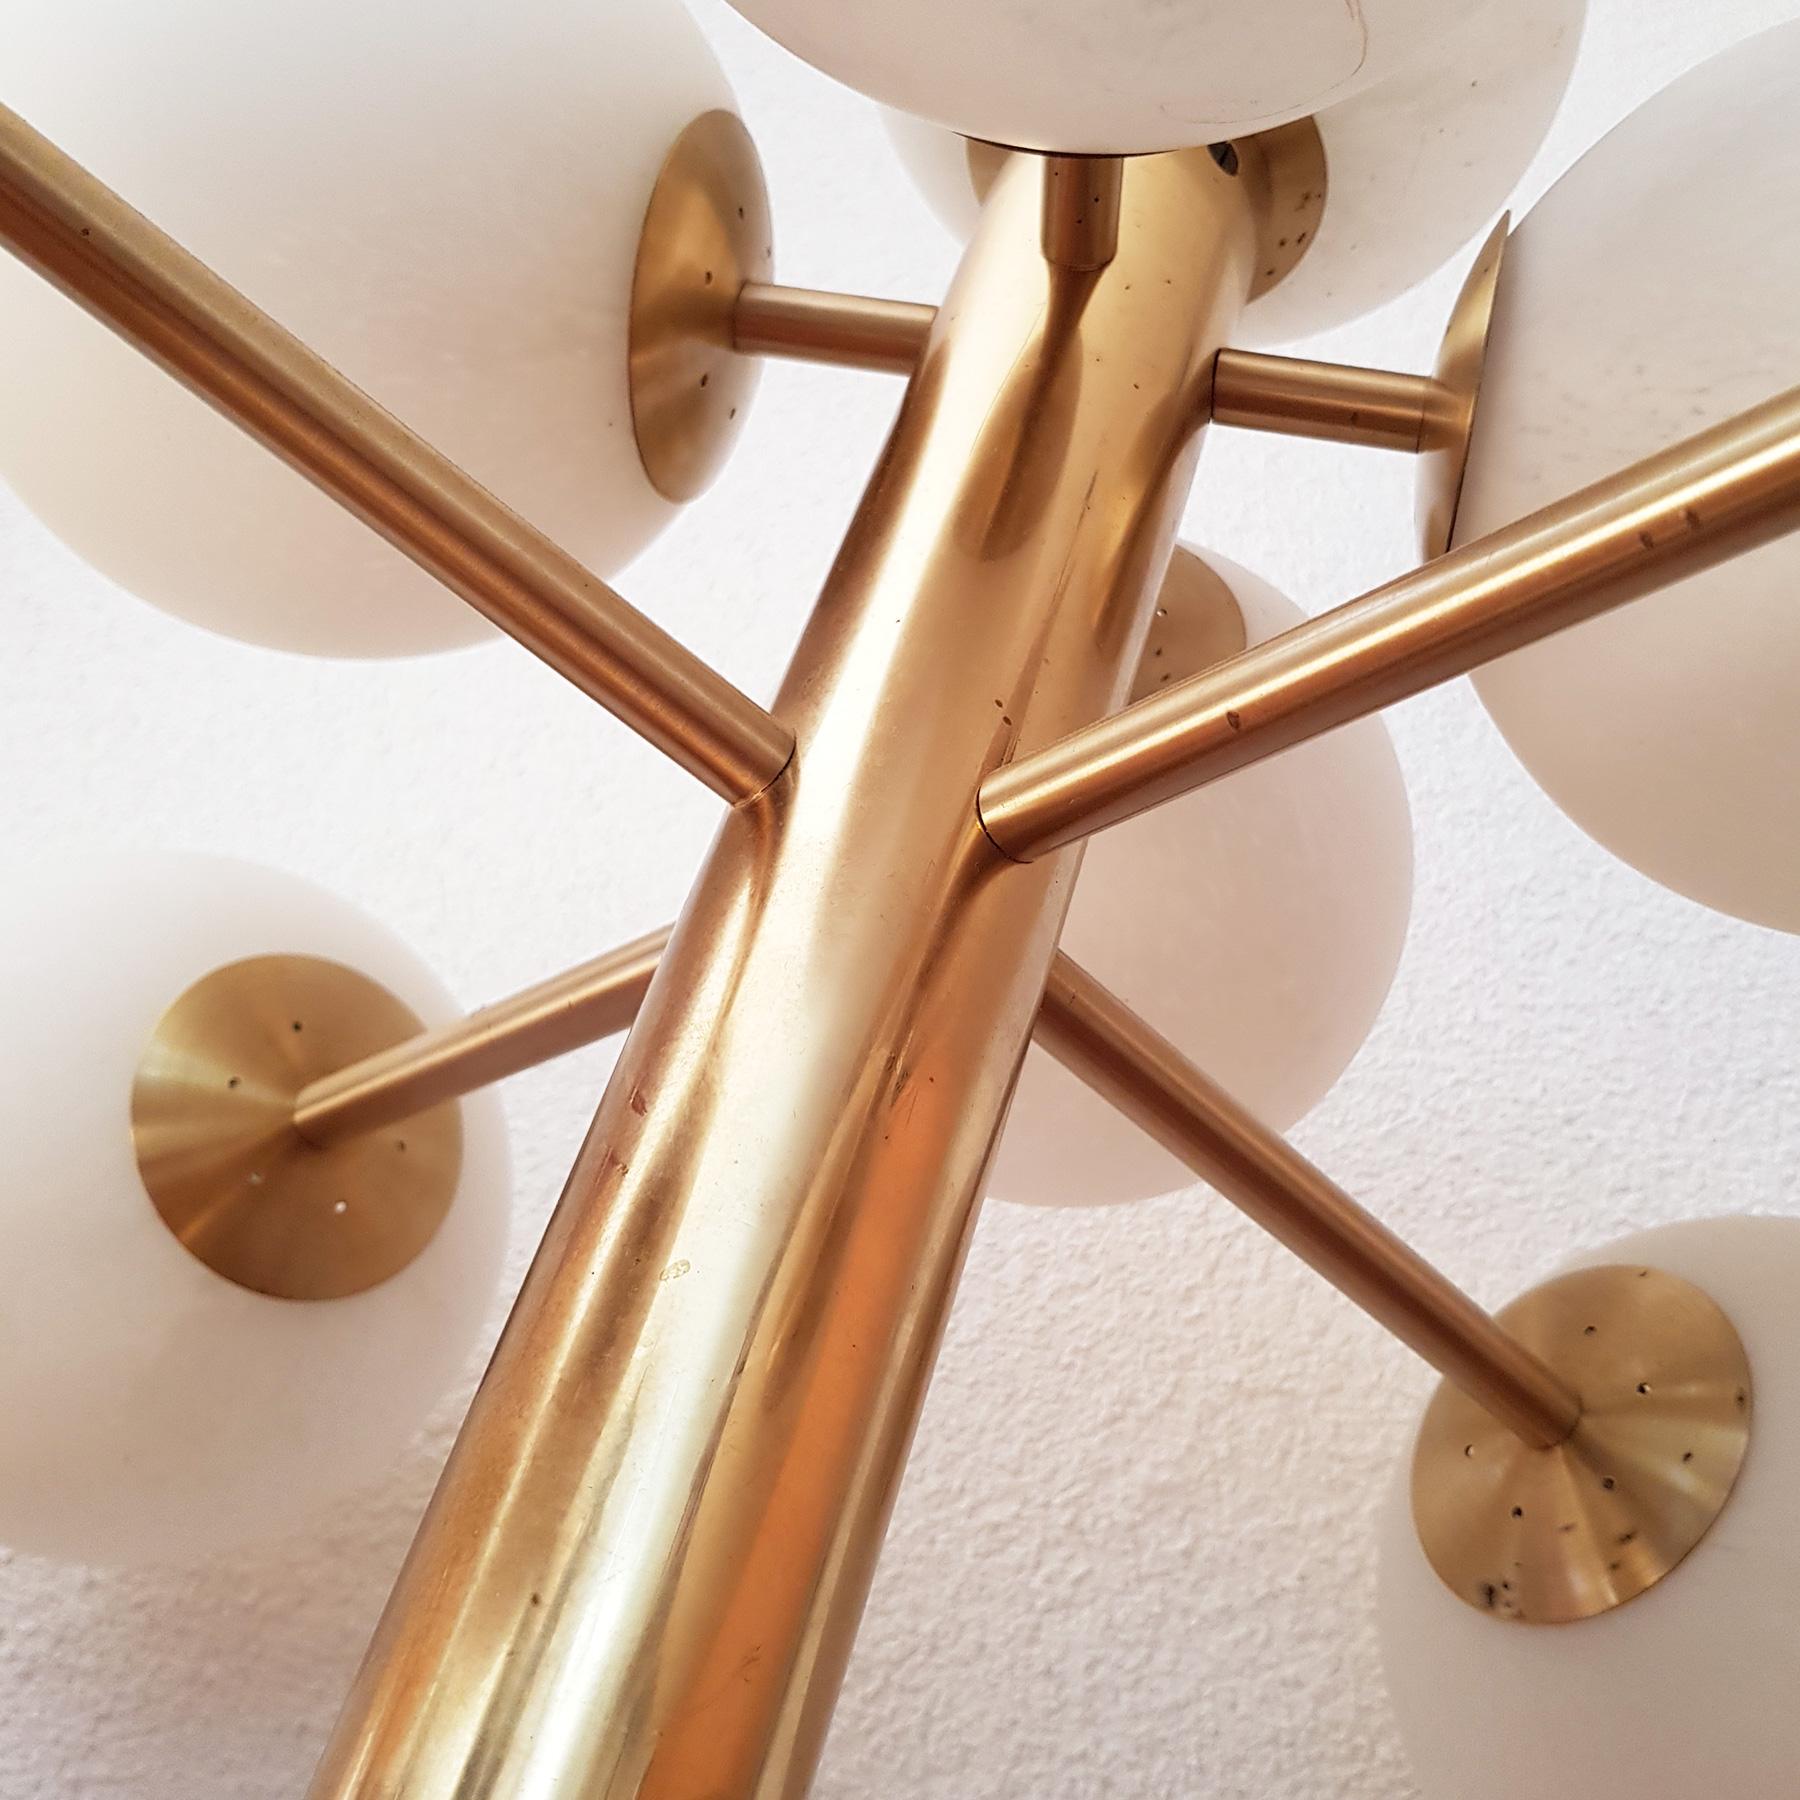 Large midcentury Sputnik table or desk lamp.
Manufactured in Switzerland by the family company Bietenholz.
This elegant lamp has nine glass spheres, fixed on a metallic golden structure.
It comes with the original dimmer and the light can be